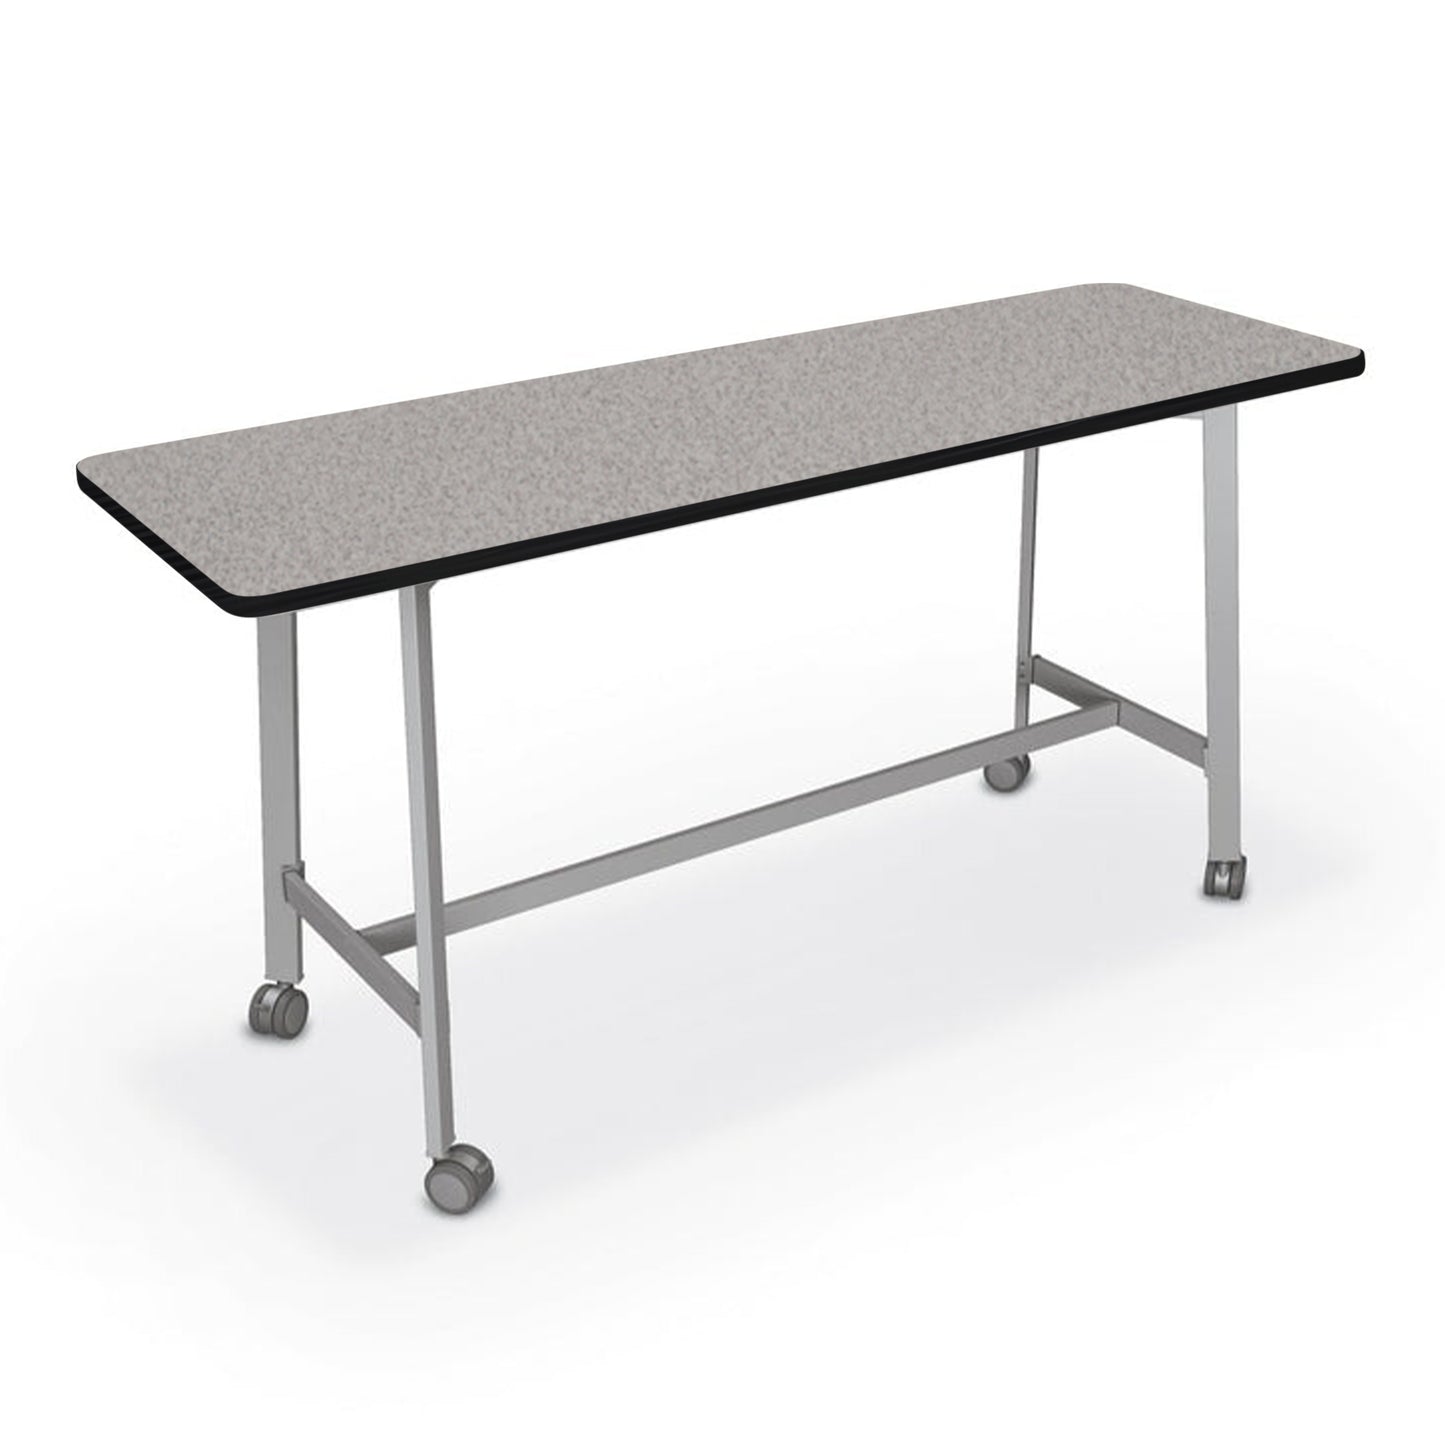 Mooreco Akt Table – 24"D x 72"W Rectangle, Laminate Top, Fixed Height Available in 29"H, 36"H, or 42"H